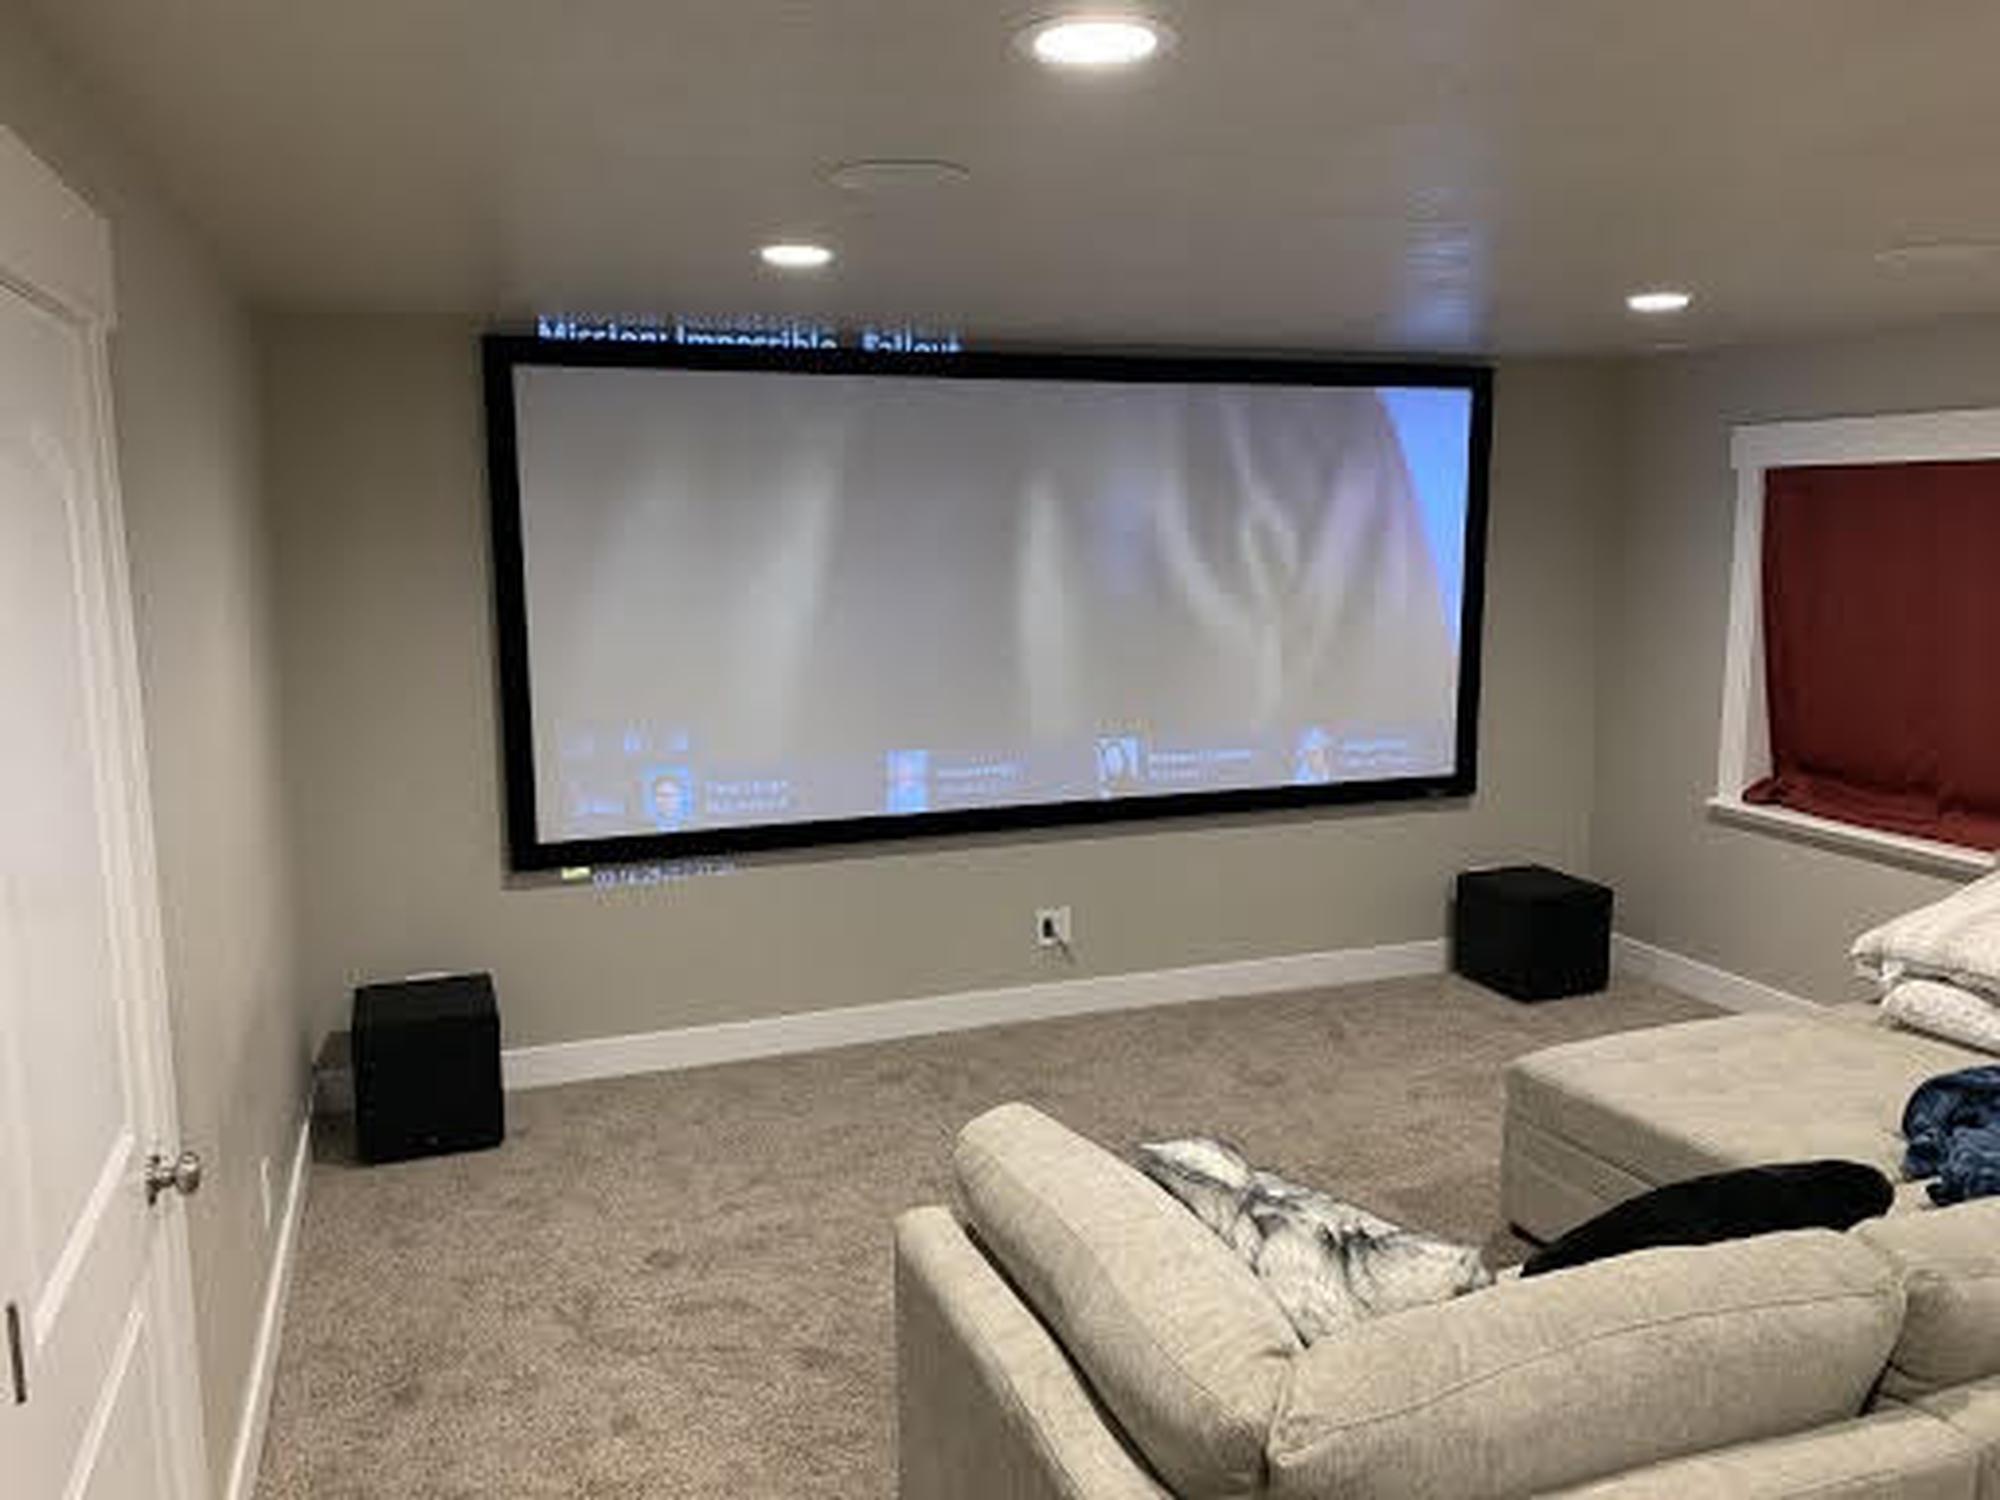 Thanks to Argenta Solutions and Modus VR, the client and his family now enjoy the high-caliber Dolby Atmos home theater they dreamed of owning.